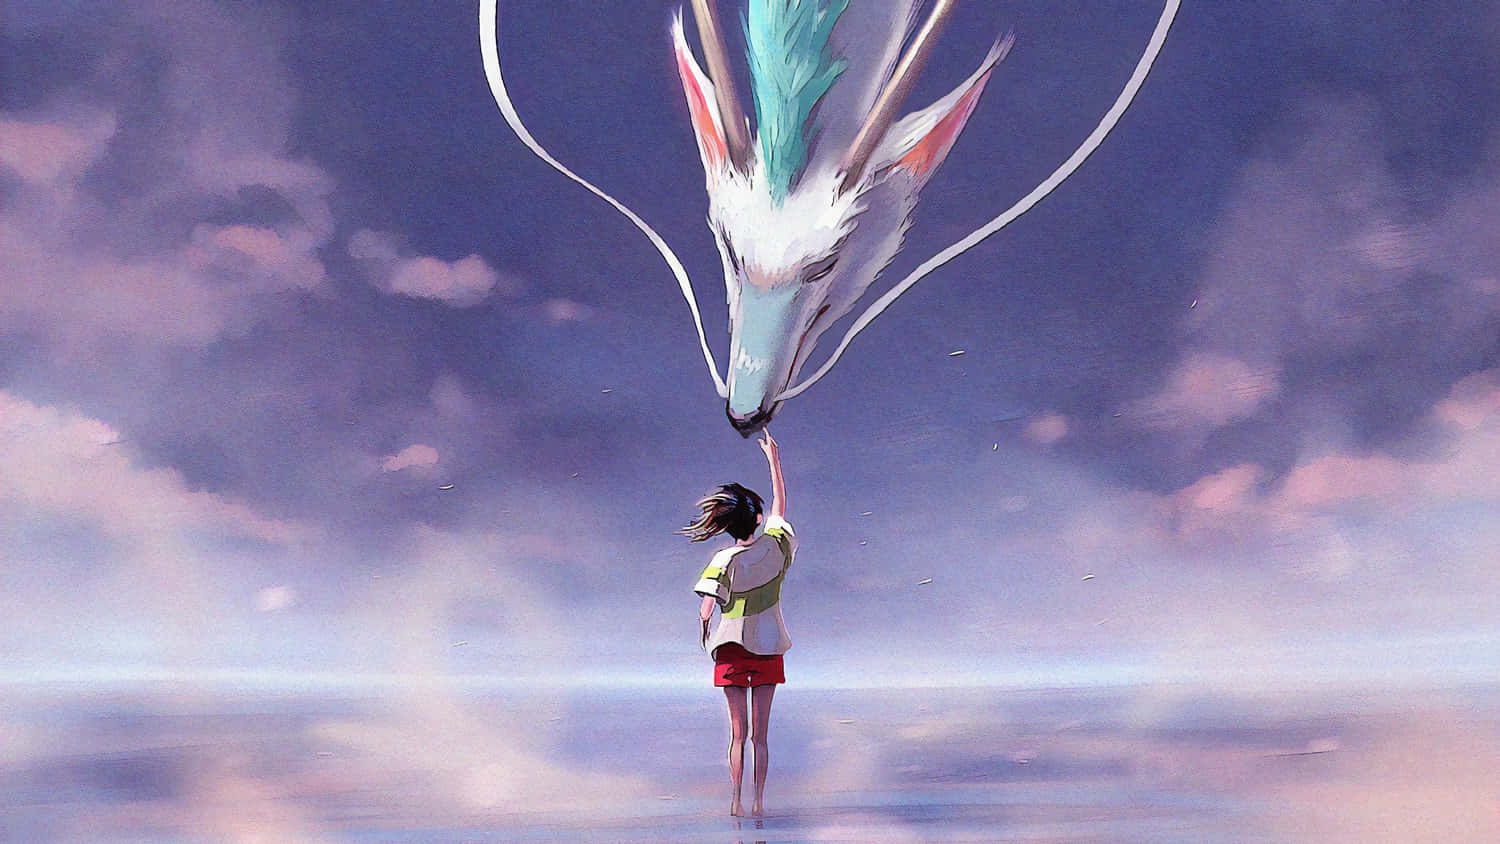 Image  Chihiro's Journey of Discovery in Spirited Away